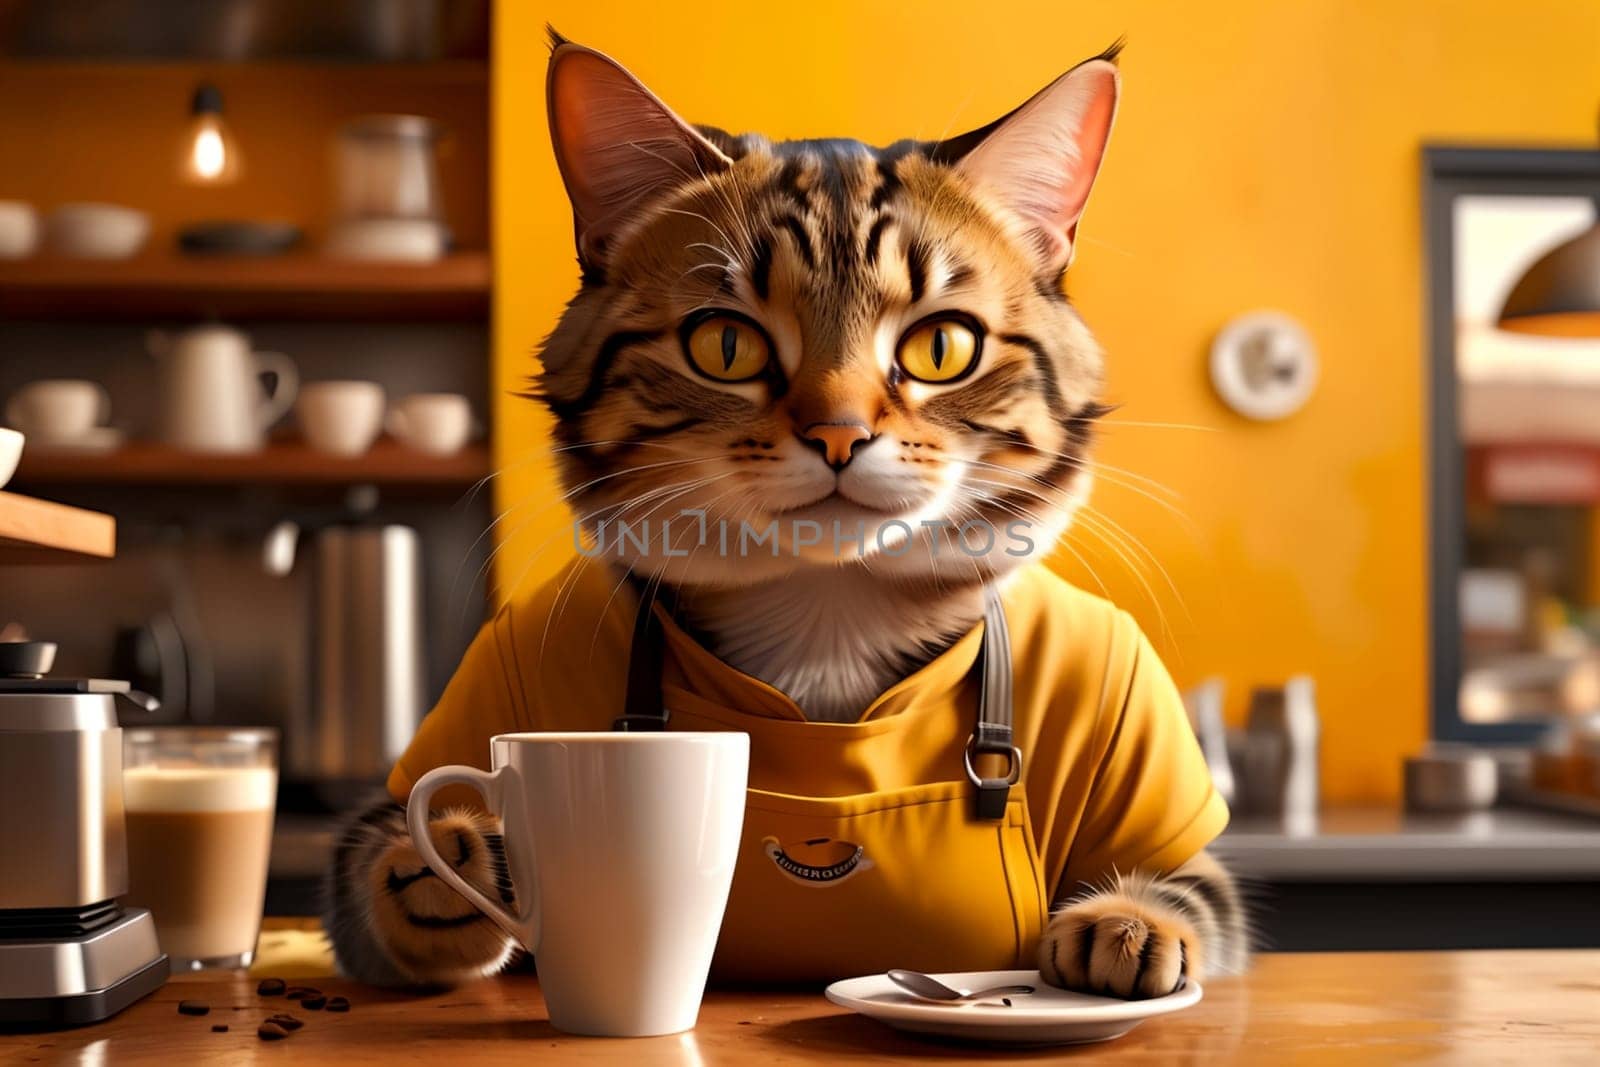 cat barista makes coffee near the coffee machine in a cafe .